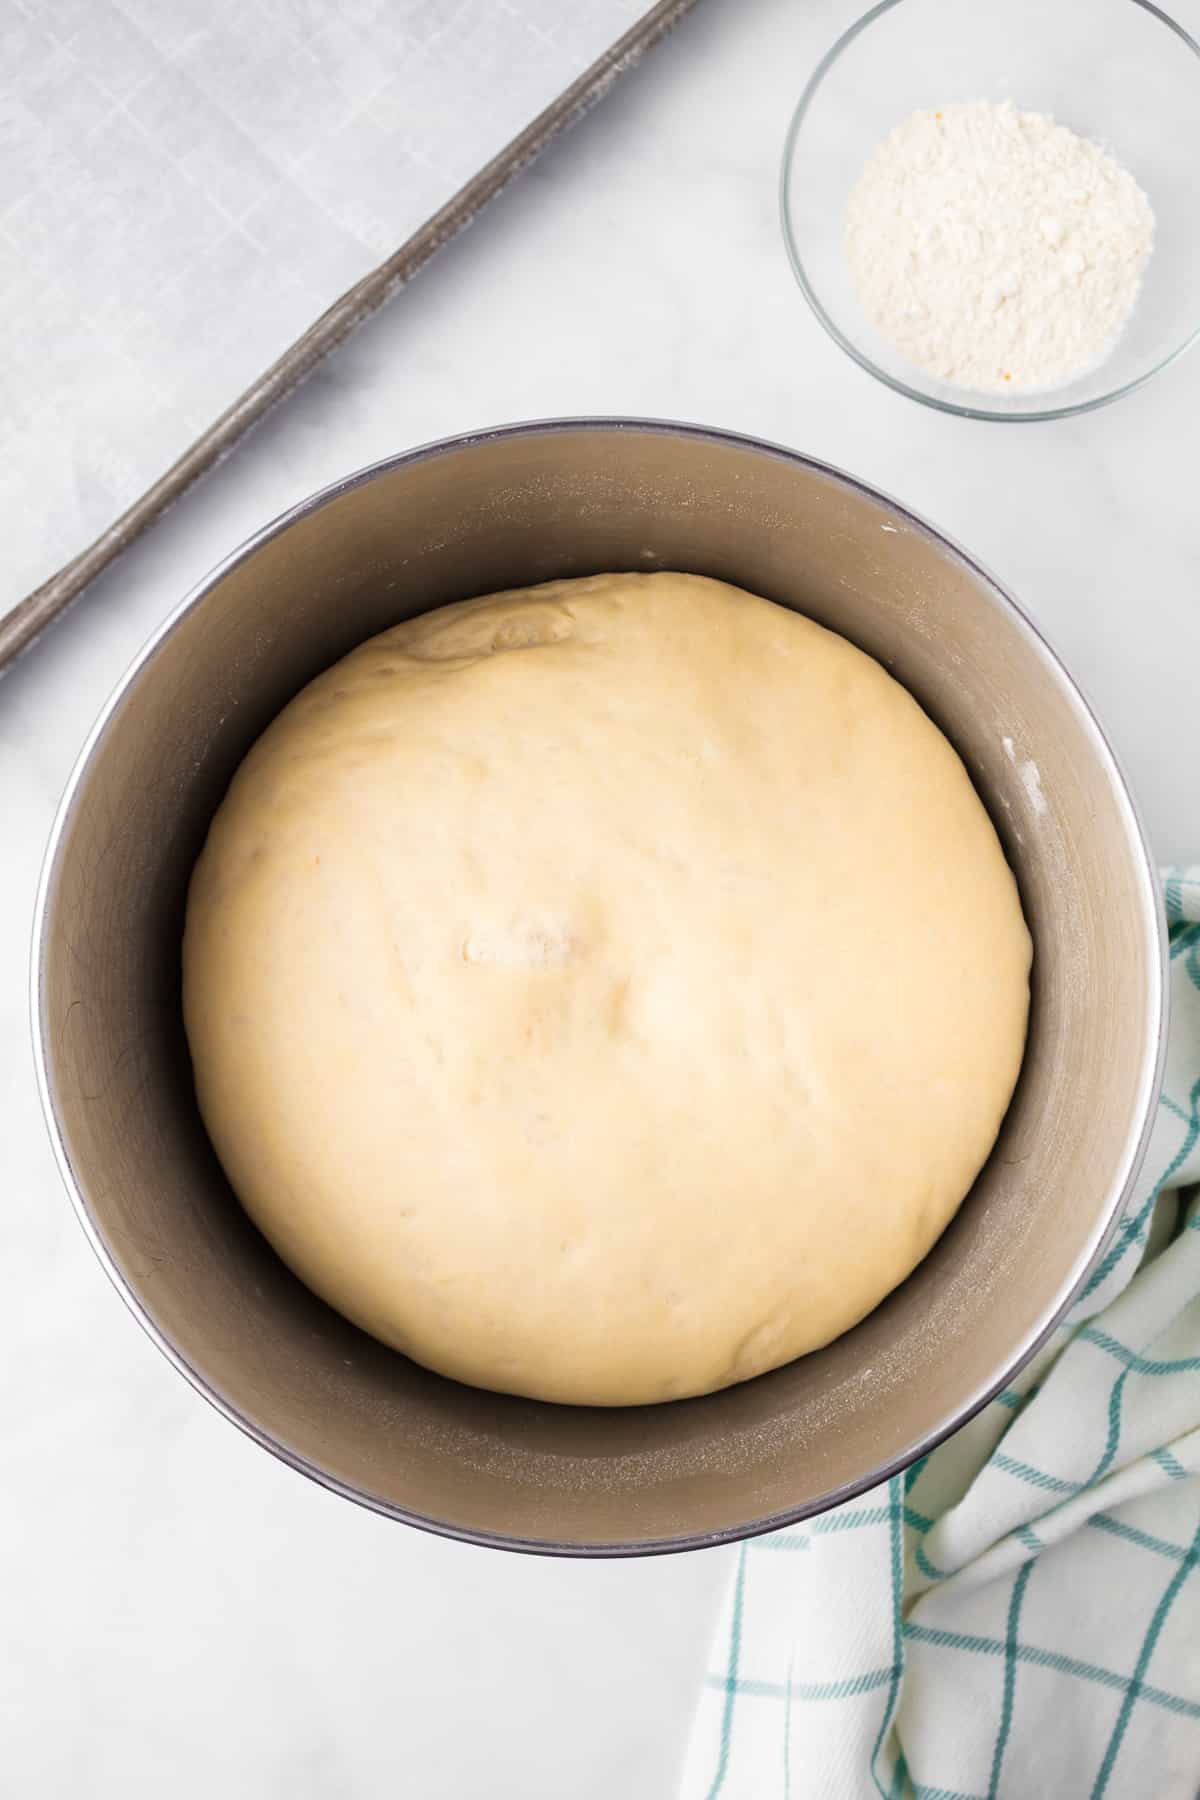 Garlic knot dough in a large mixing bowl from overhead after rising.